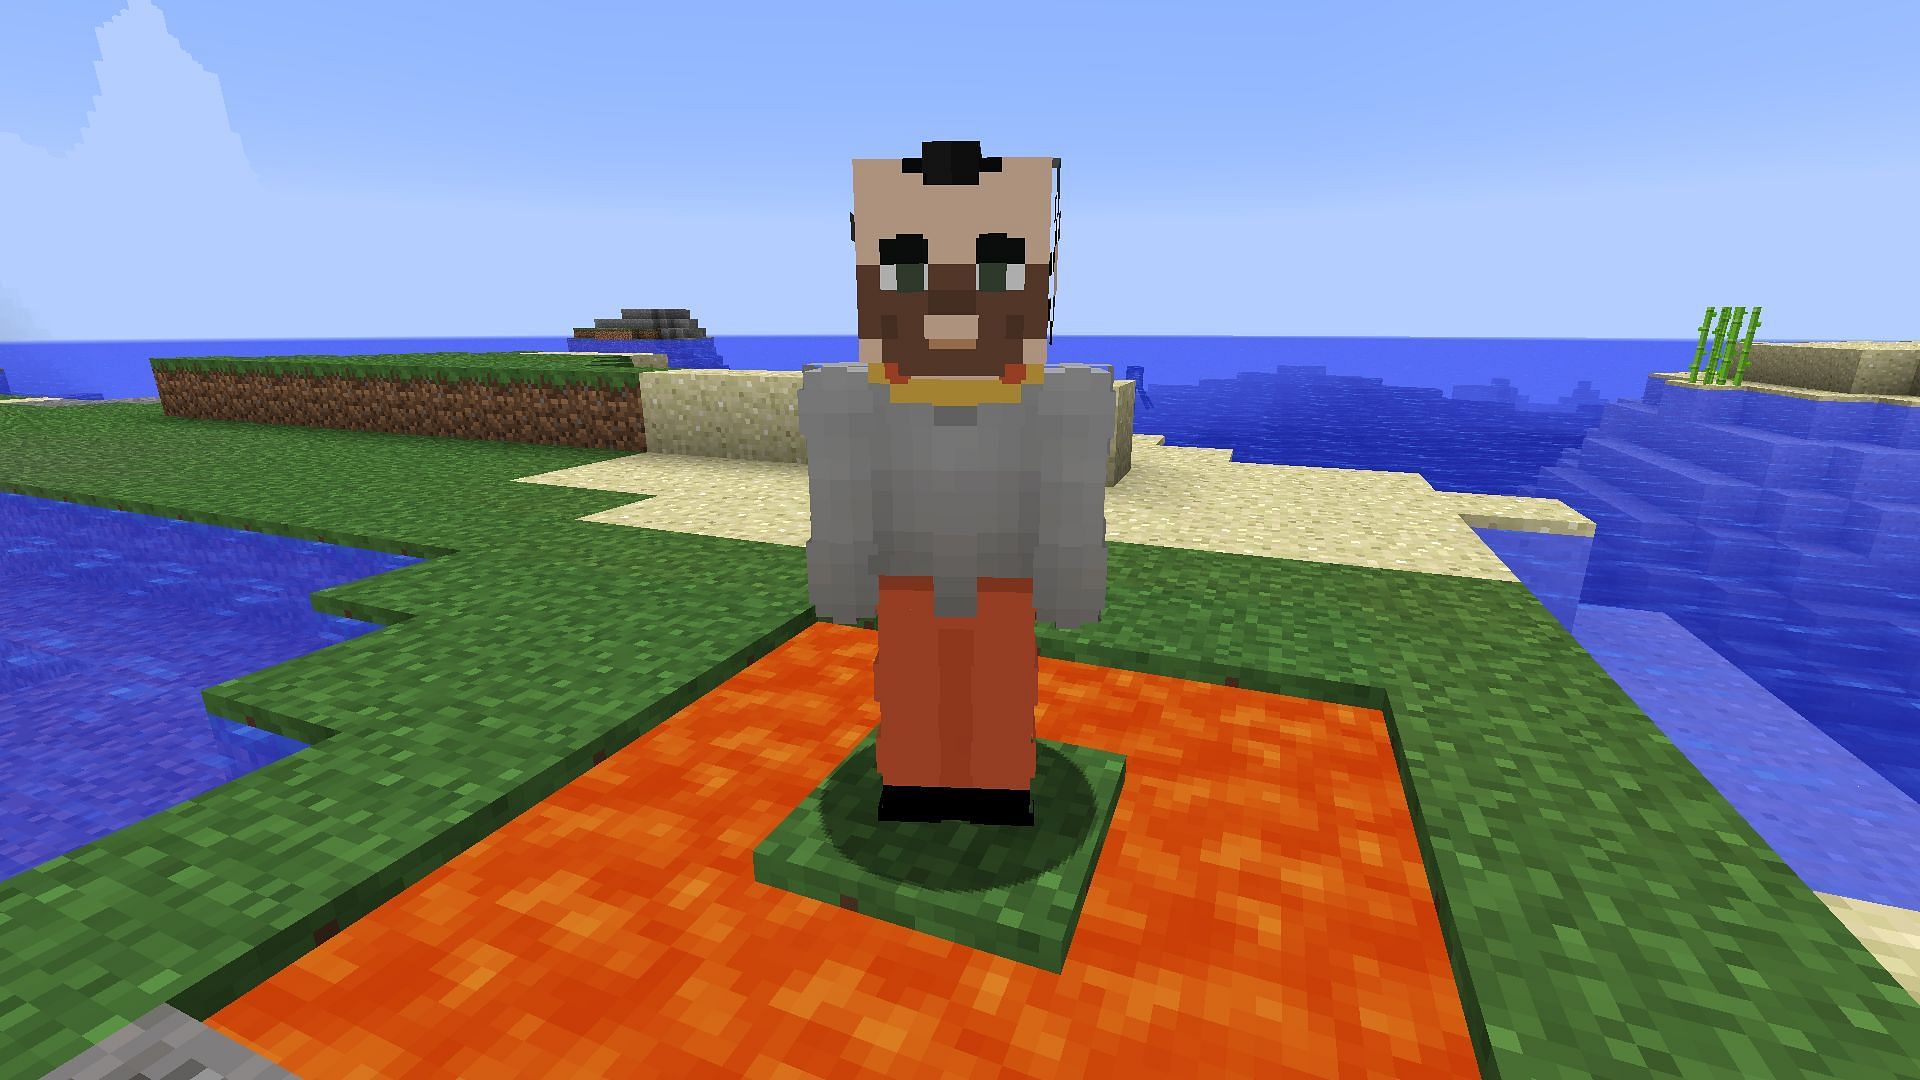 Hannibal Lecter and other movie villains can be added to Minecraft (Image via Mojang)